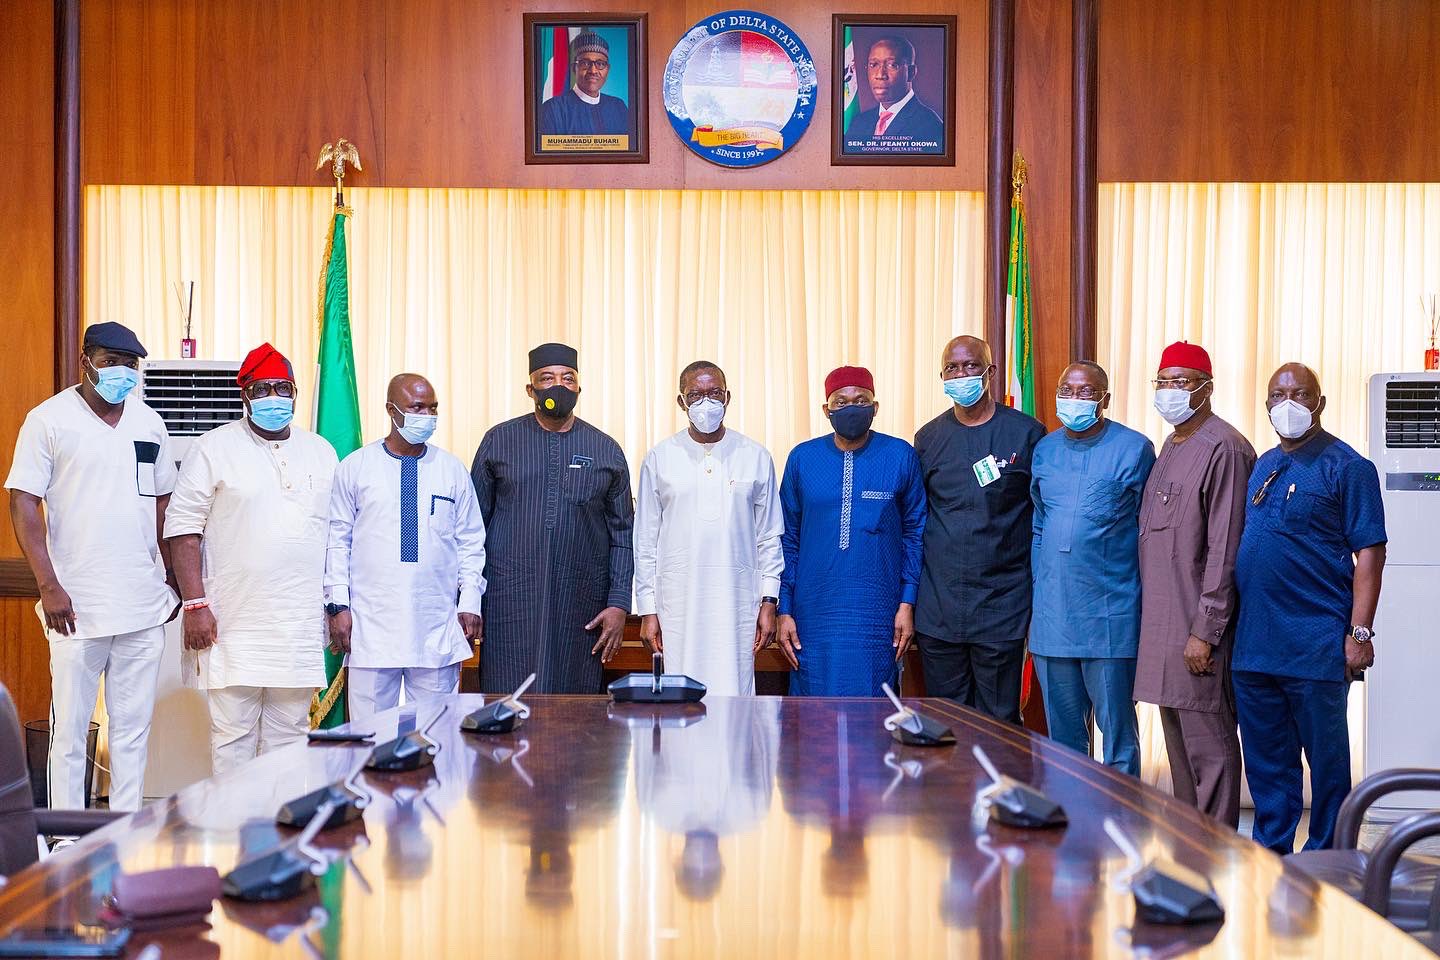 Delta Governor, Senator Dr. Ifeanyi Okowa (5th left) Minority Leader, Federal House of Representatives, Rt. Hon. Ndudi Elumelu (5th right), Hon. Julius Pondi, (left), Hon. Thomas Ereyetomi, (2nd left), Hon. Ben Igbakpa (3rd left)and Hon. Leo Ogor, (4th left), Hon. Victor Nwokolo,(4th right), Hon. Ejiroghehne Waive (3rd right), Hon. Ossai Nicholas Ossai, (2nd right) and Hon. Efe Afe, (right) during a solidarity visit by members of Delta caucus in the Federal House of Representatives to the Governor in Asaba over destruction of public infrastructure during the EndSARS Protest on Wednesday, October 28, 2020